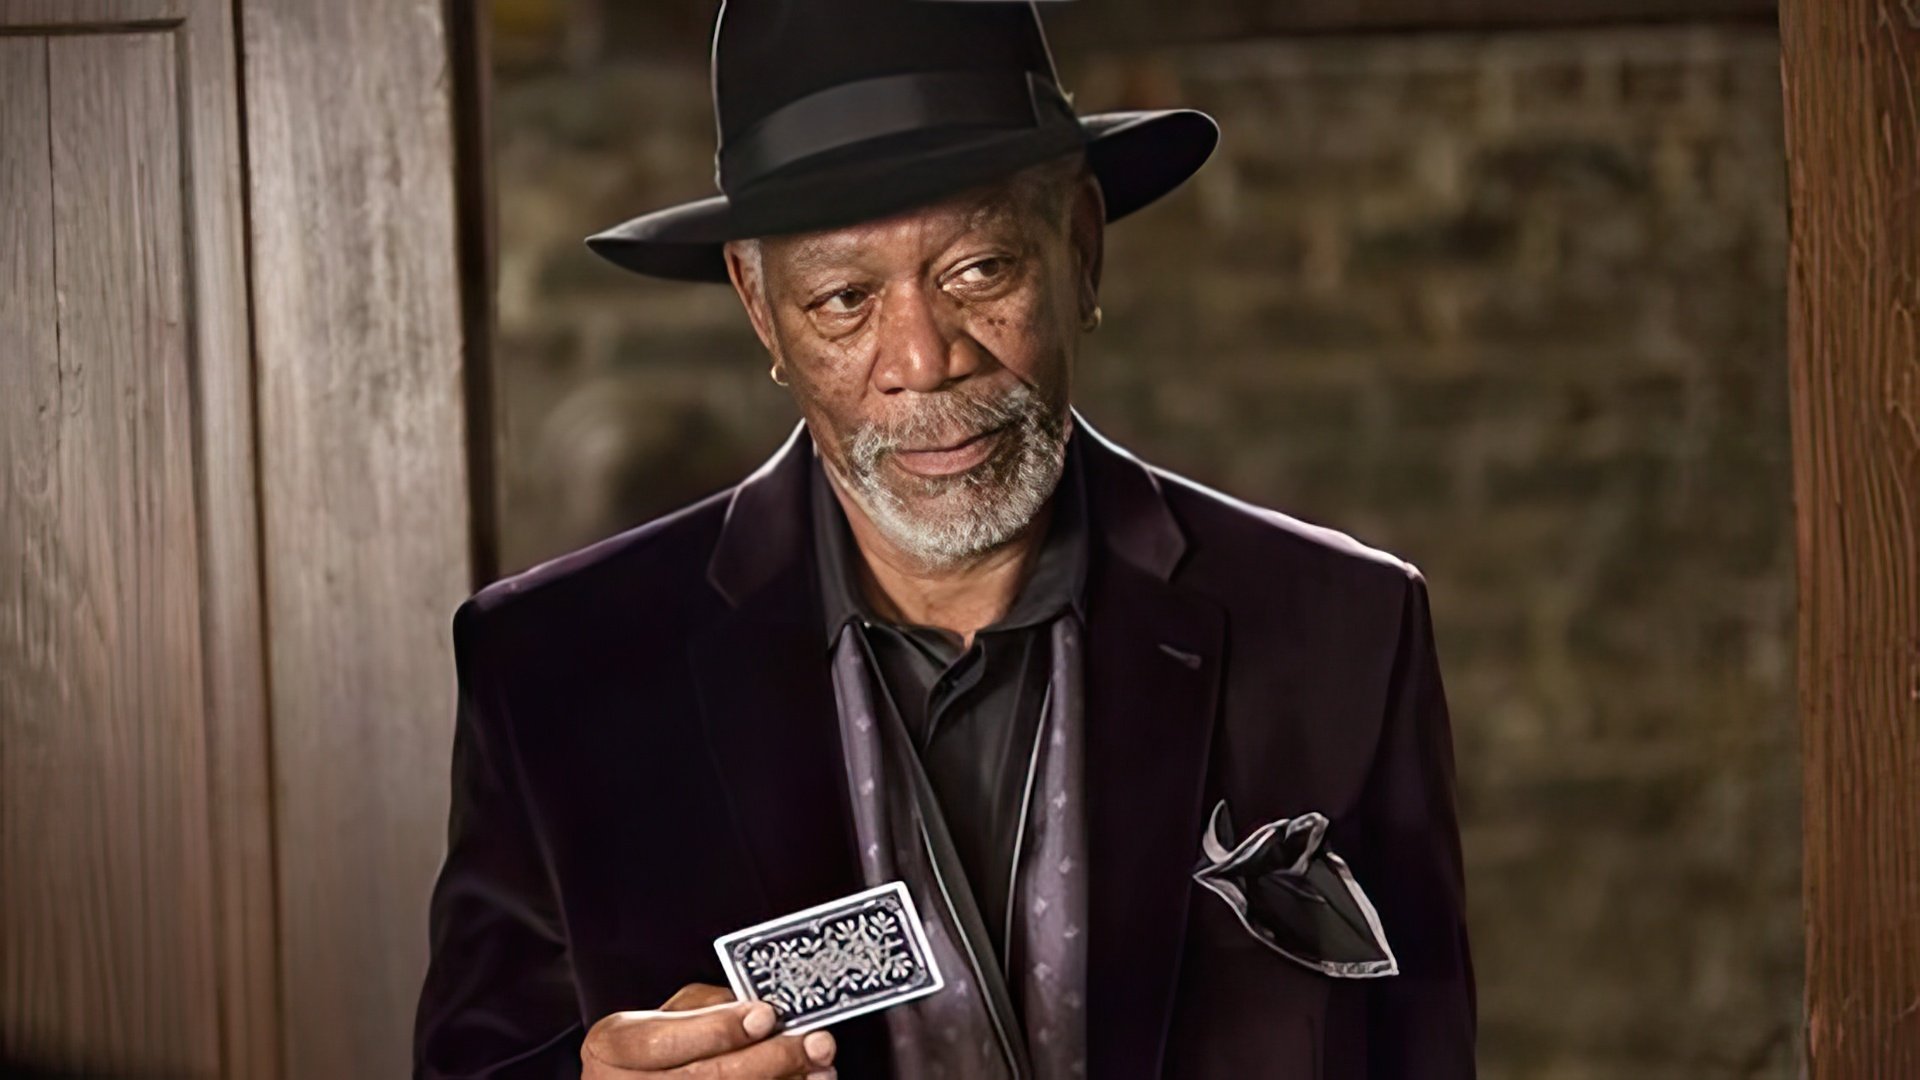 Morgan Freeman in the Now You See Me